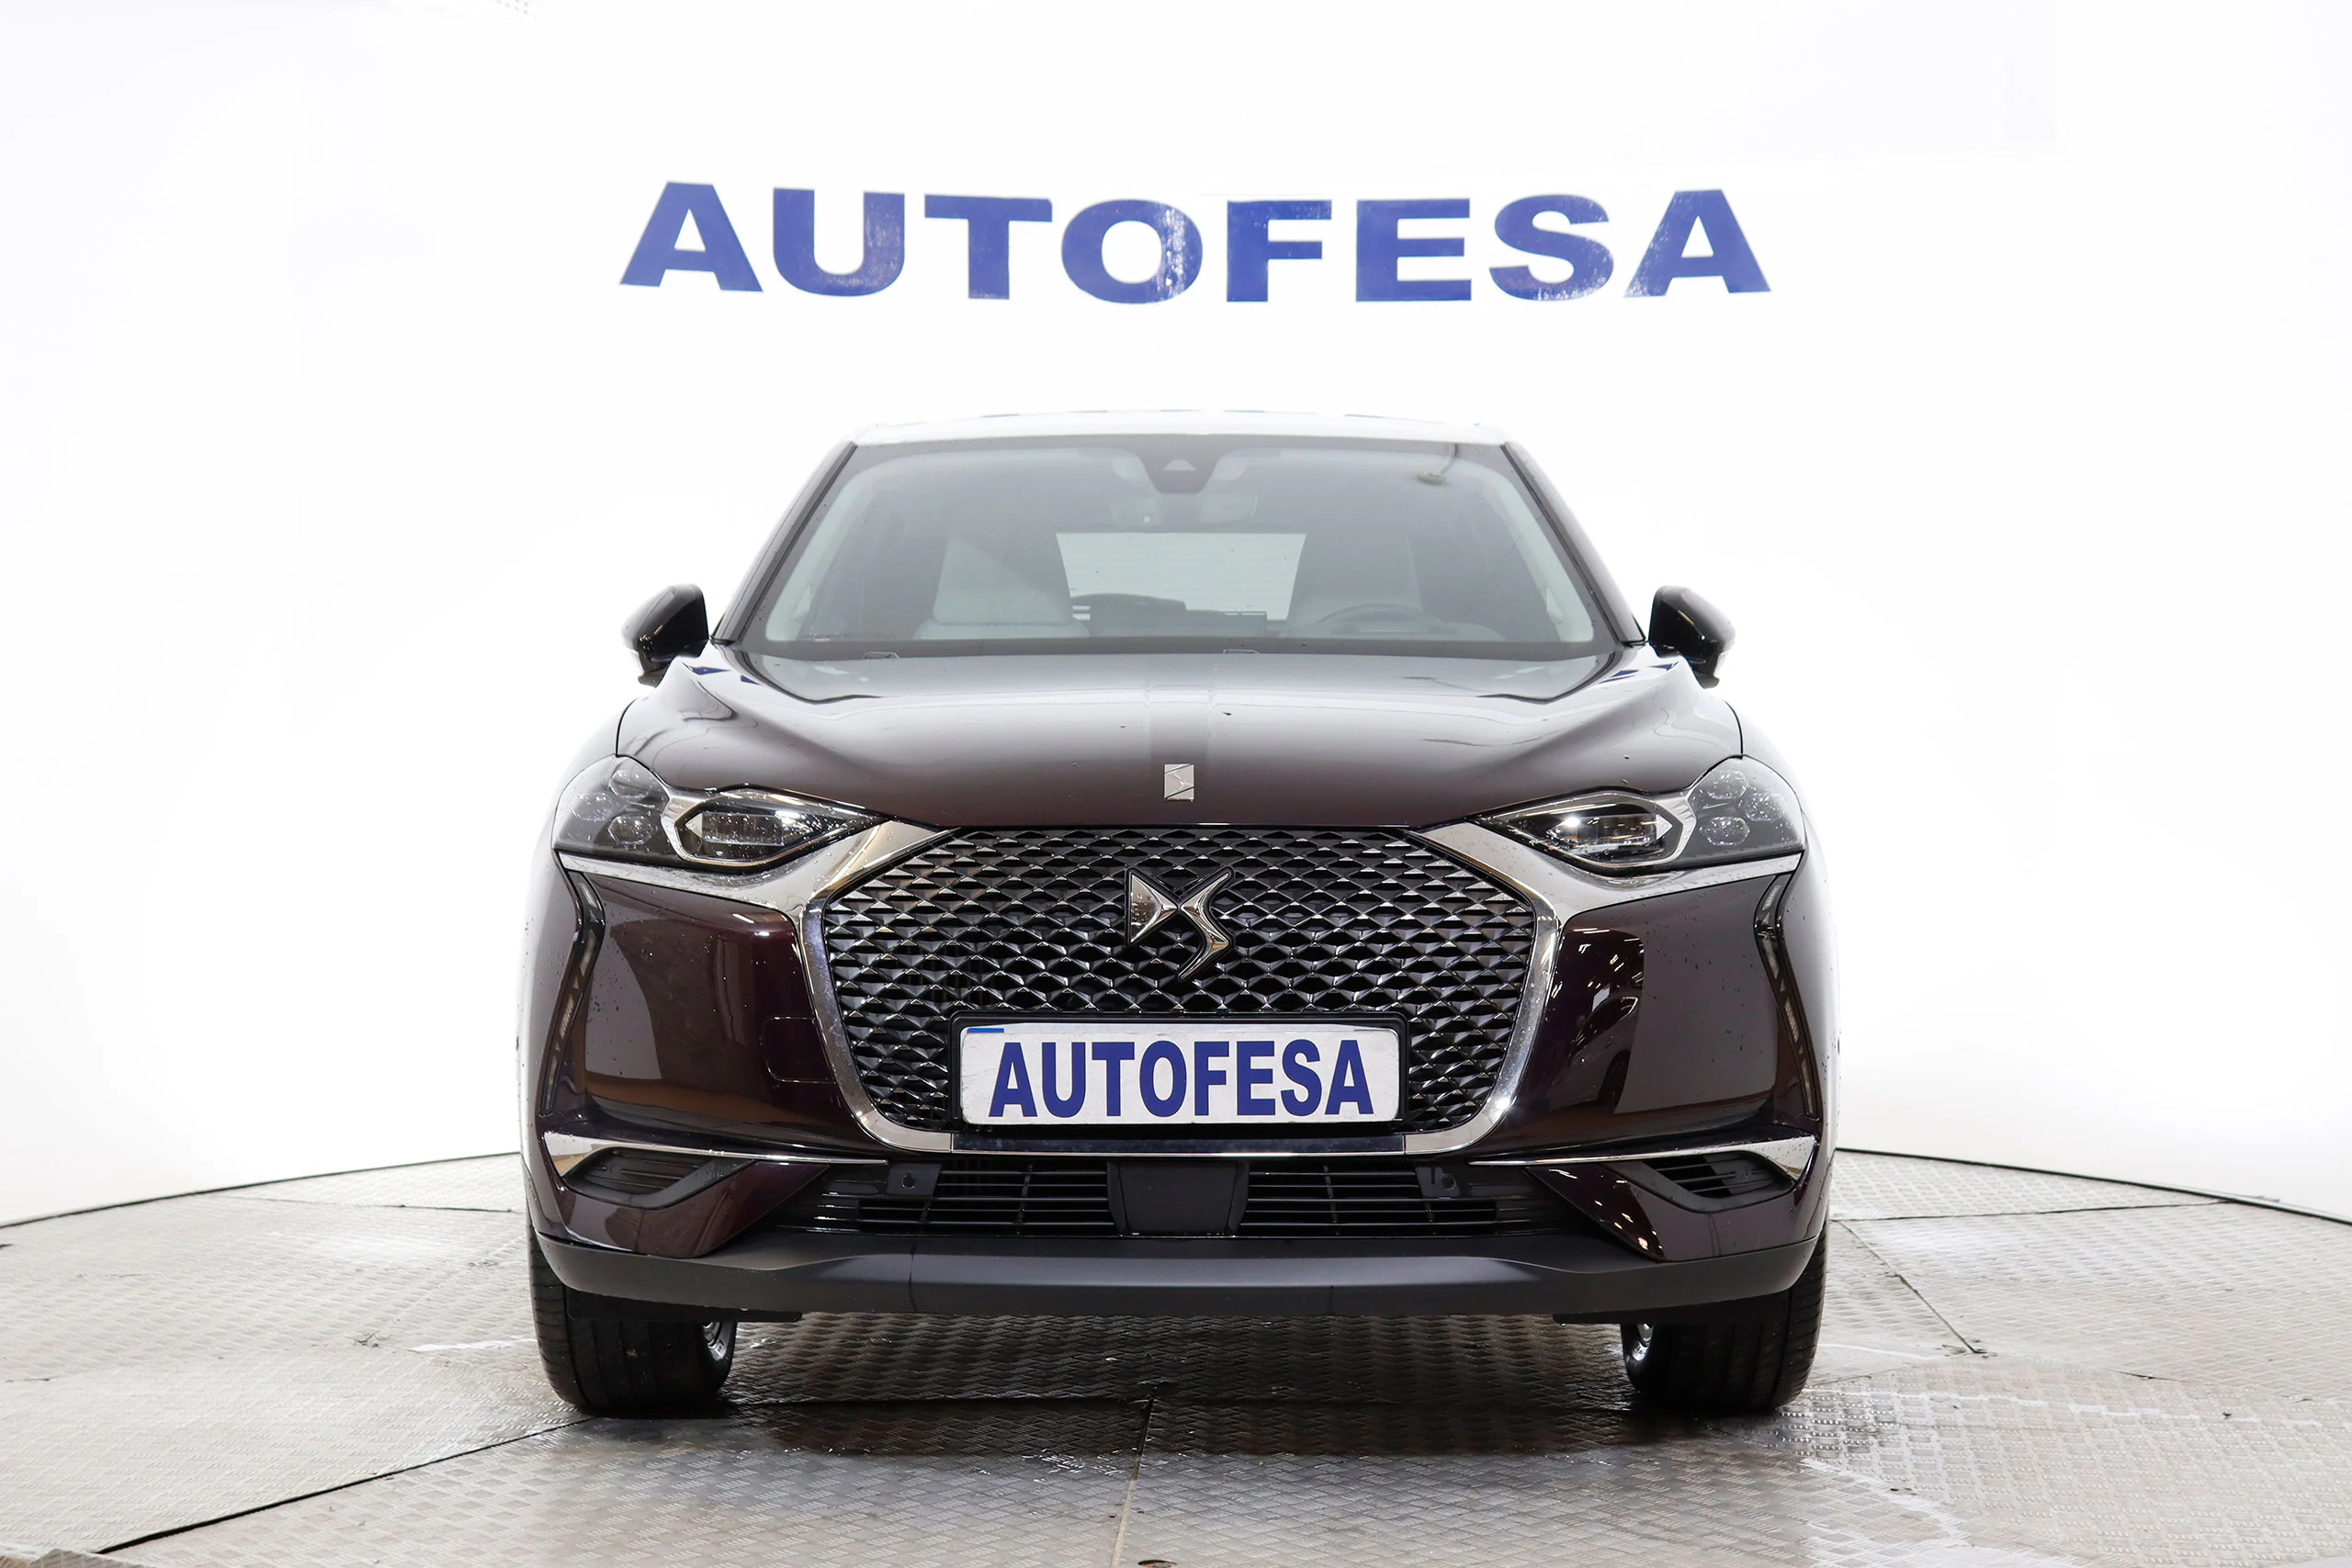 DS DS 3 Crossback 1.2 Grand Chic 130cv Auto 5P S/S # NAVY, FAROS LED - Foto 2